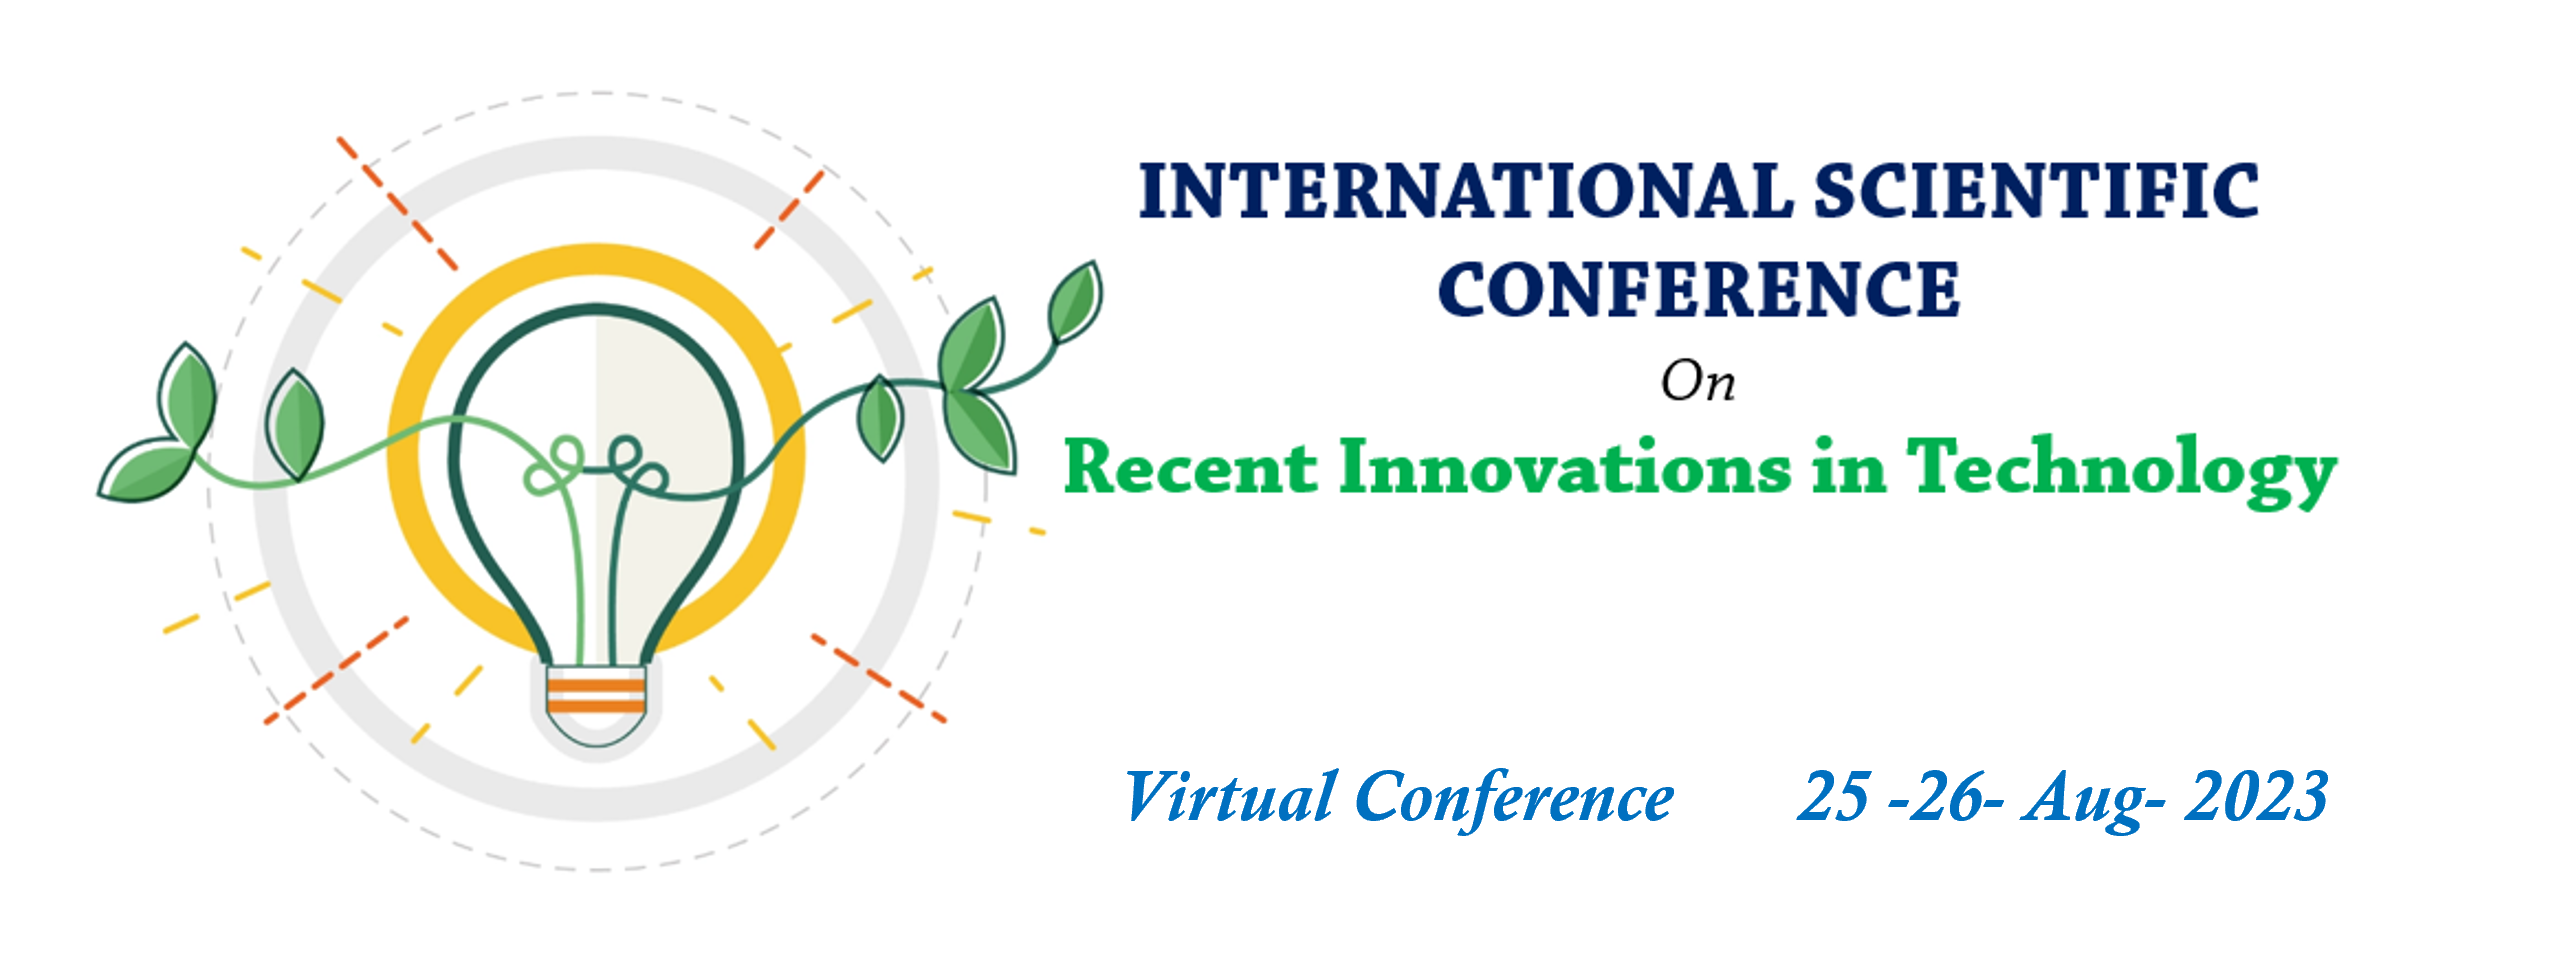 International Scientific Conference on Recent Innovation In Technology (STEAM)